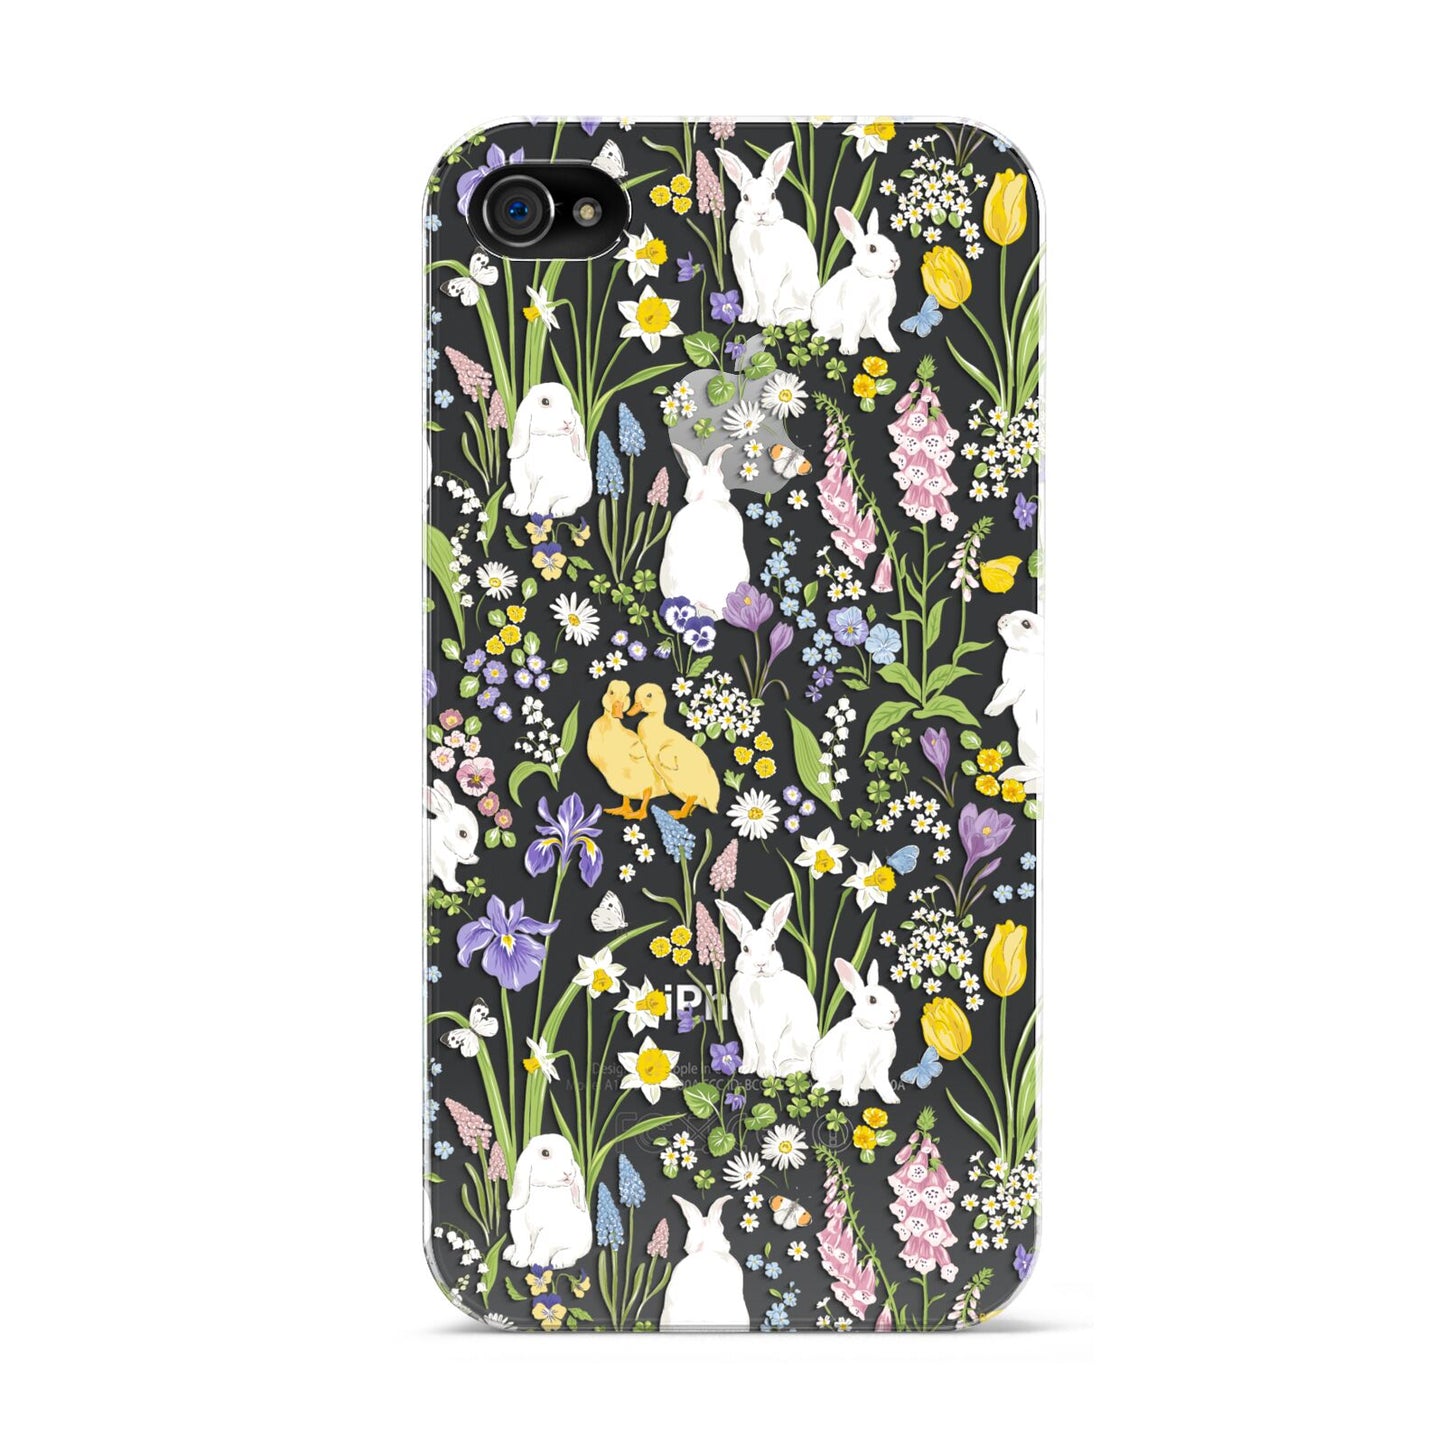 Easter Apple iPhone 4s Case